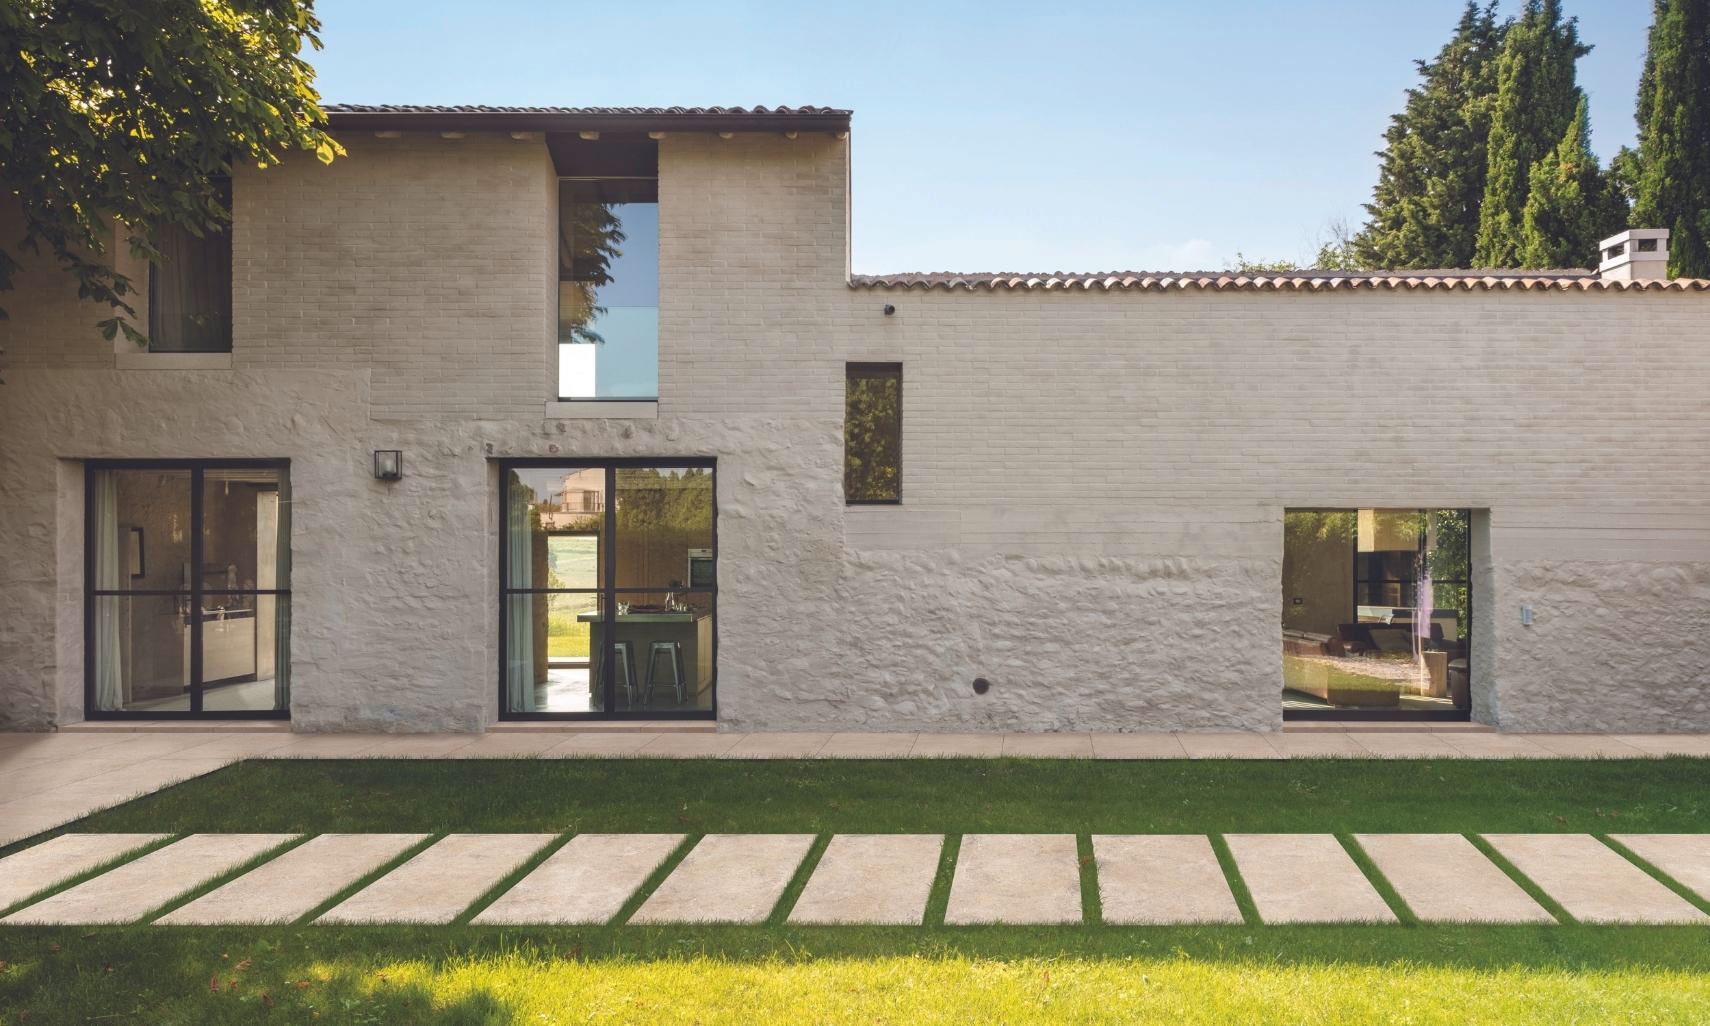 Large beige tile pavers that look like stone, set in grass in front of a beige Spanish style home with large picture windows and clay tile roof.